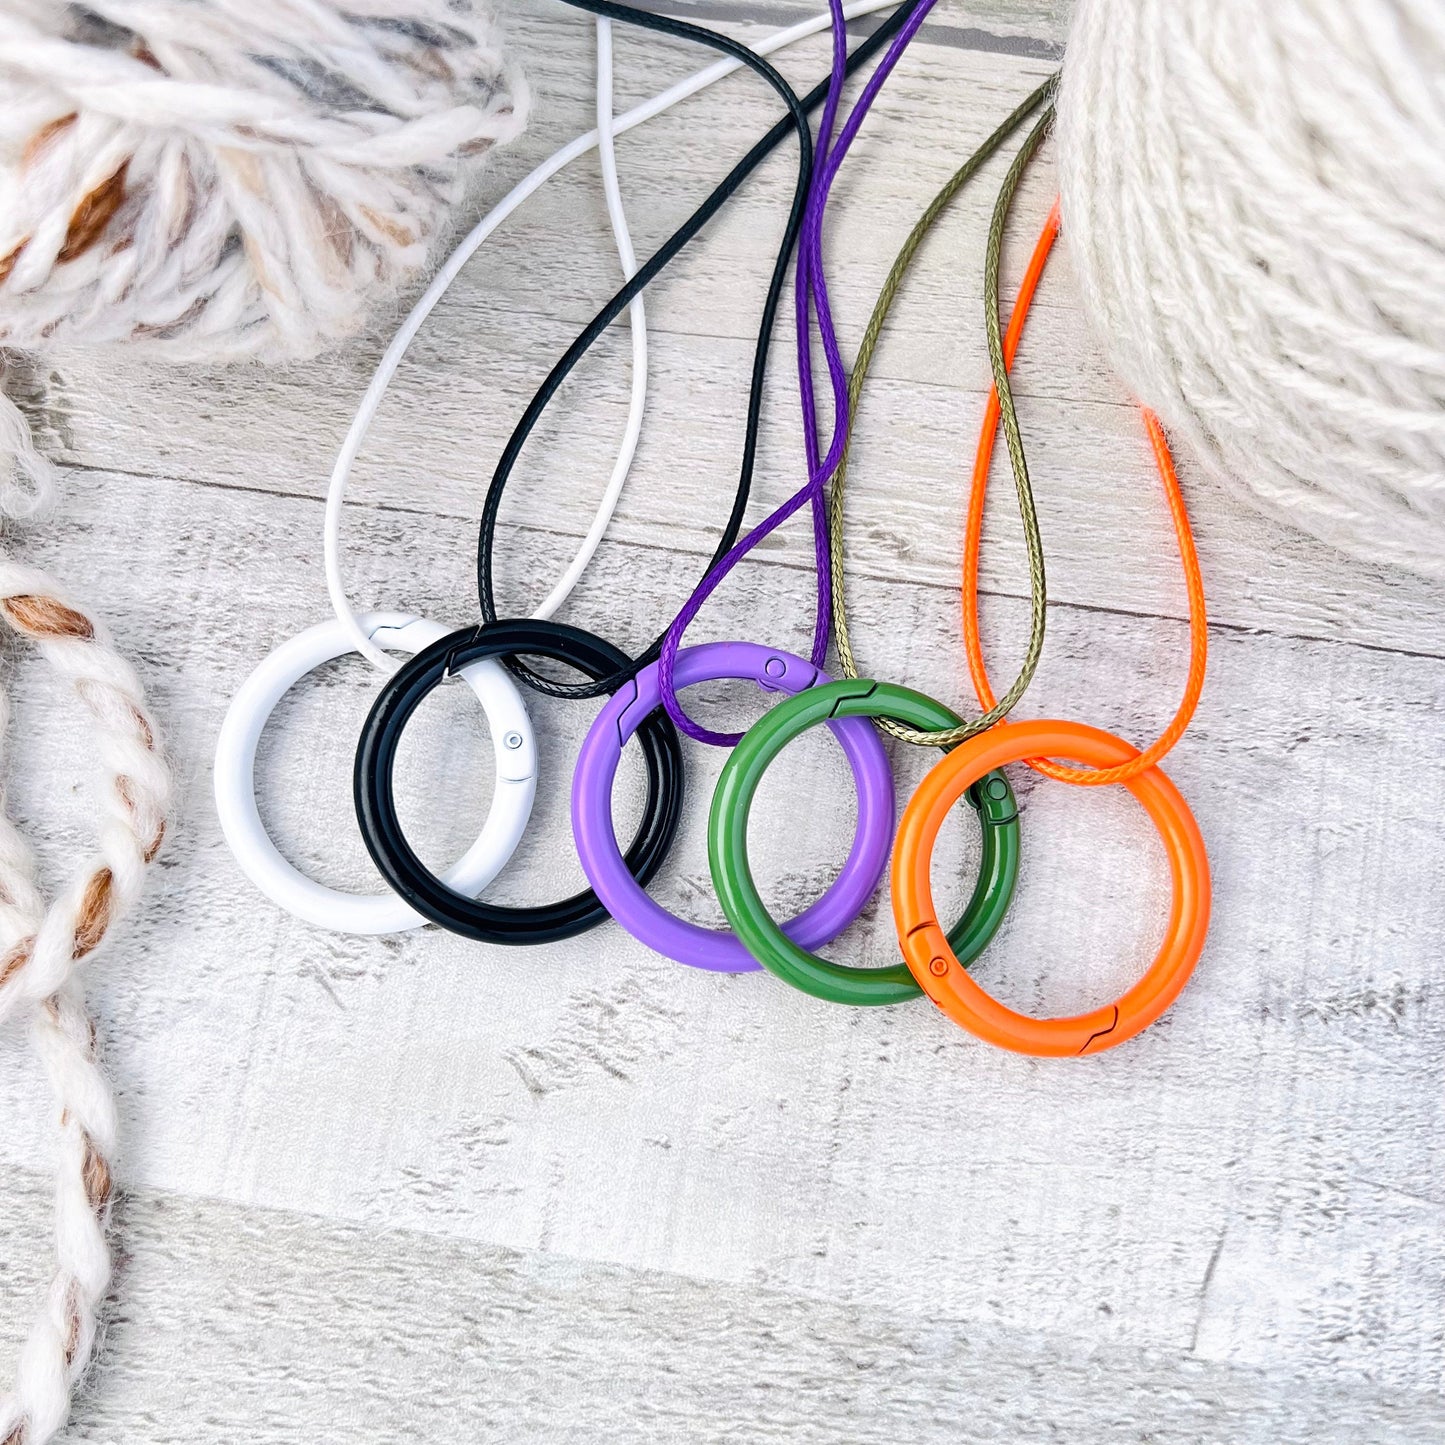 Crochet Hook Tether Lanyard - Secure Your Crochet Tools with our Tether Lanyard